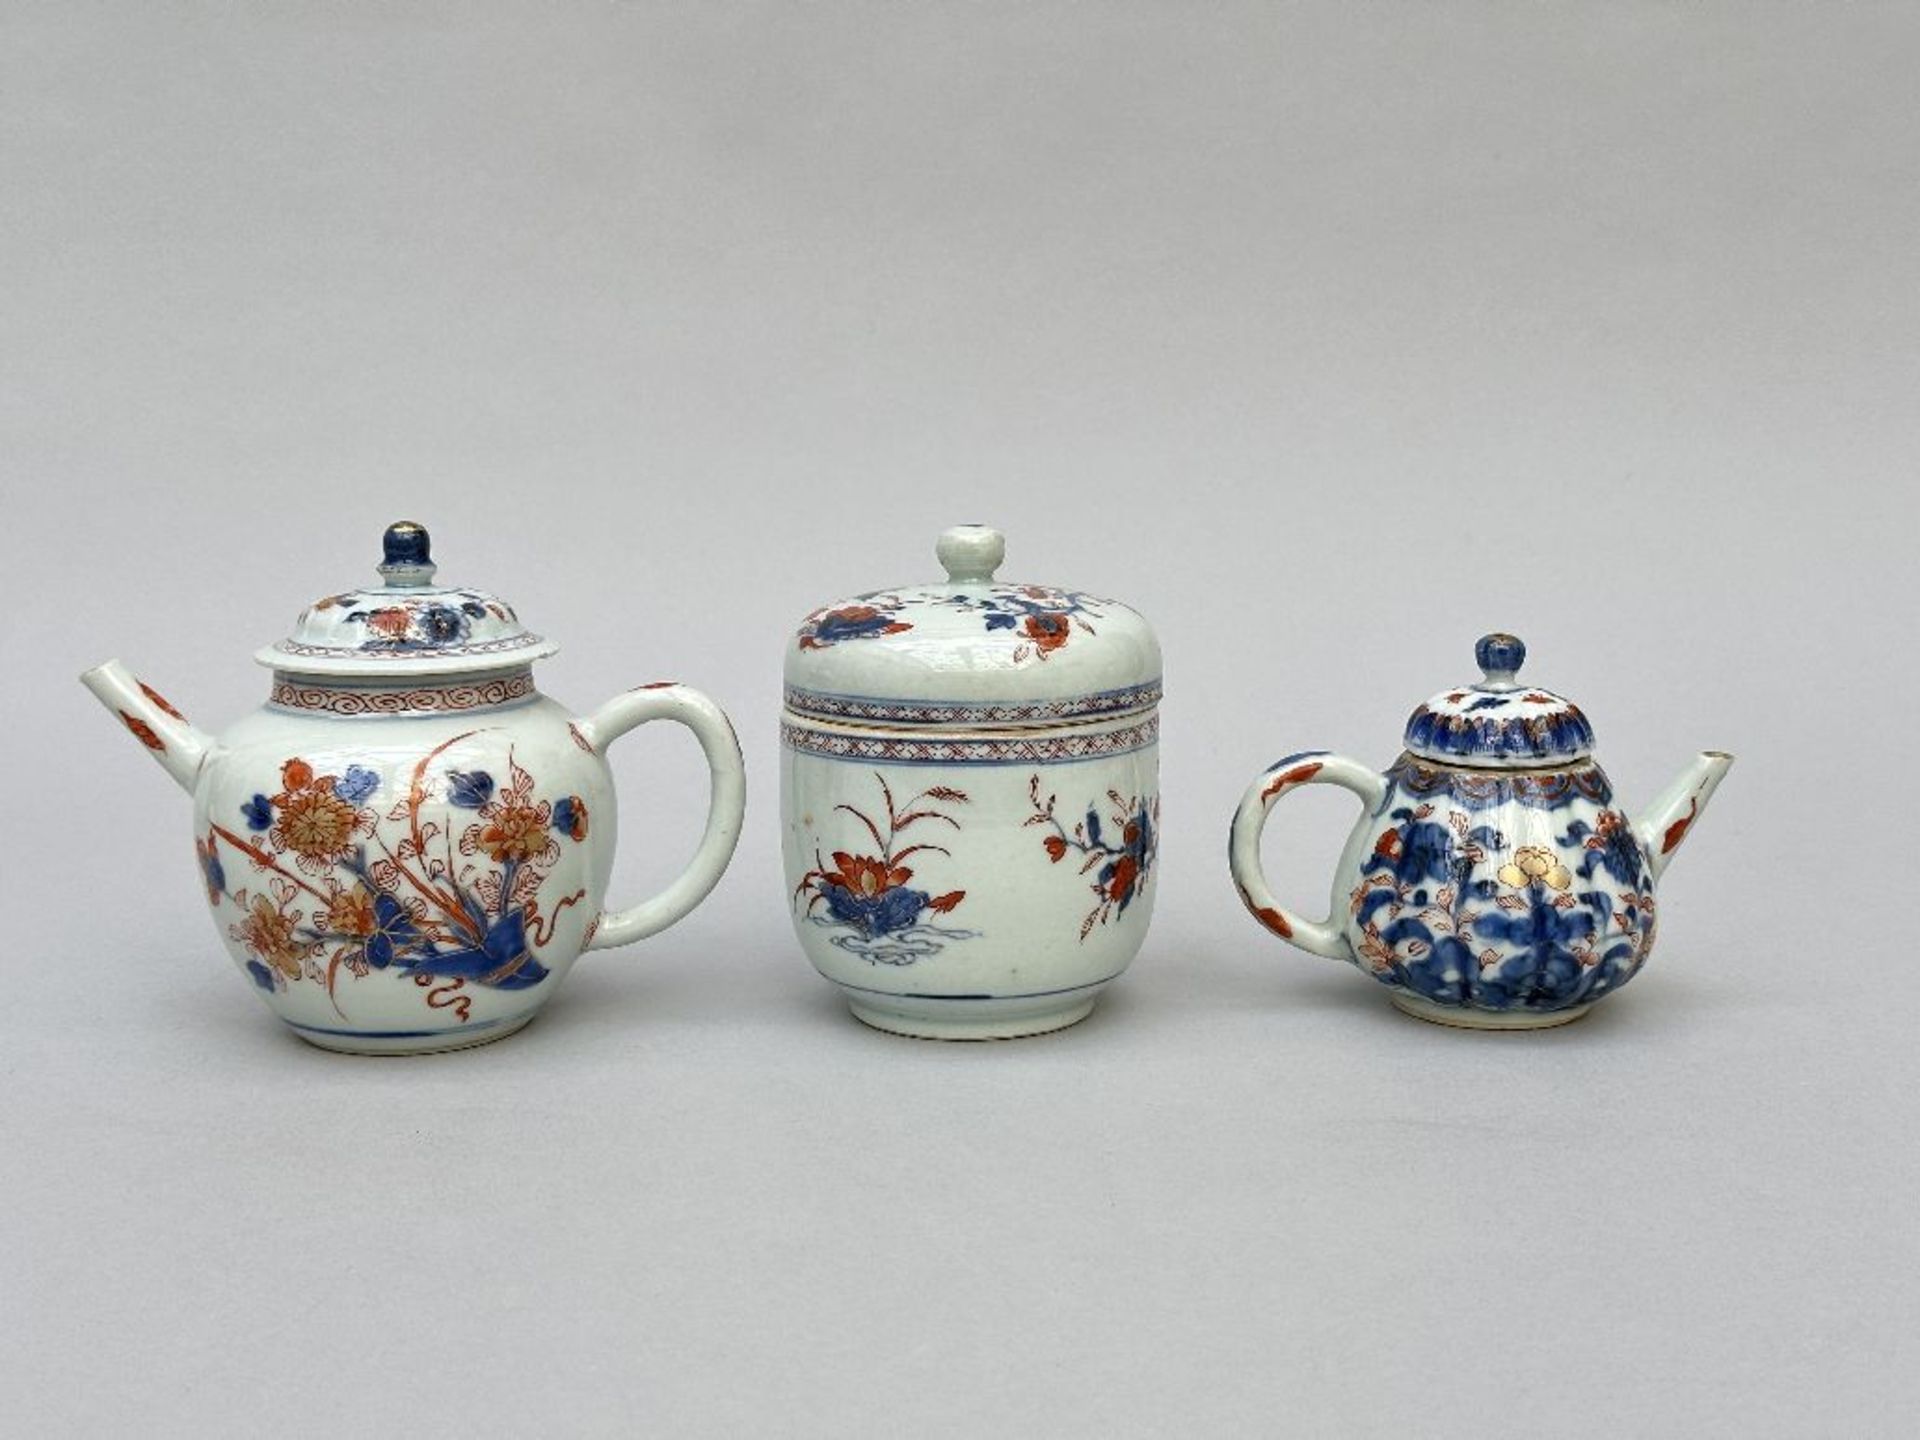 Collection of Imari porcelain: tea box and two teapots, 18th century - Image 2 of 6